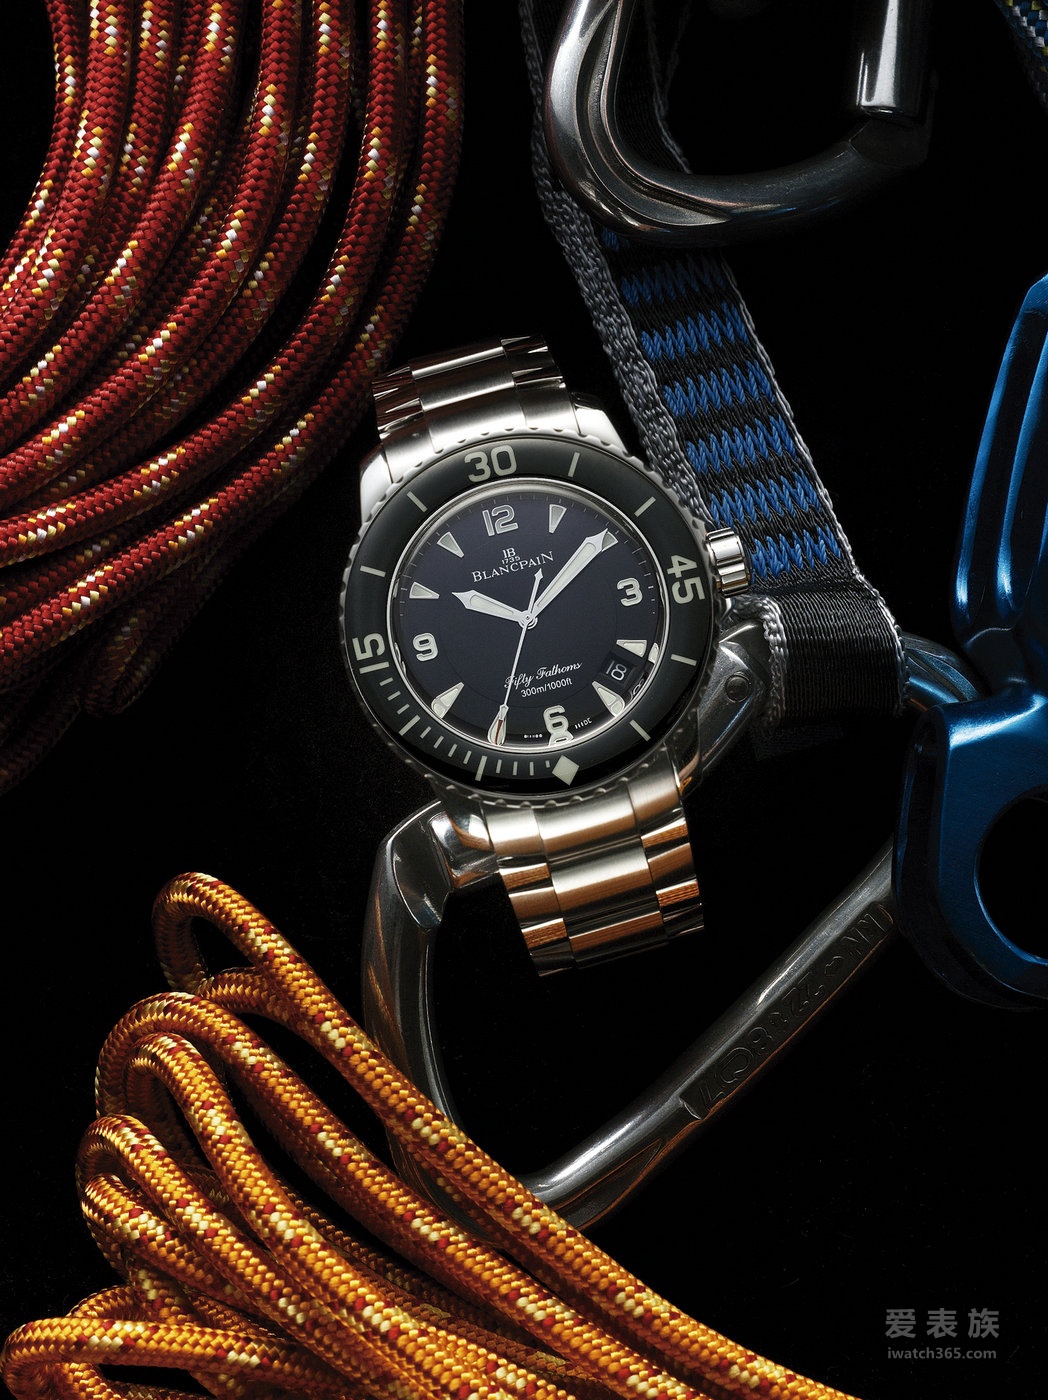 Blancpain broaden the concept of remodeling table man: the art of trust